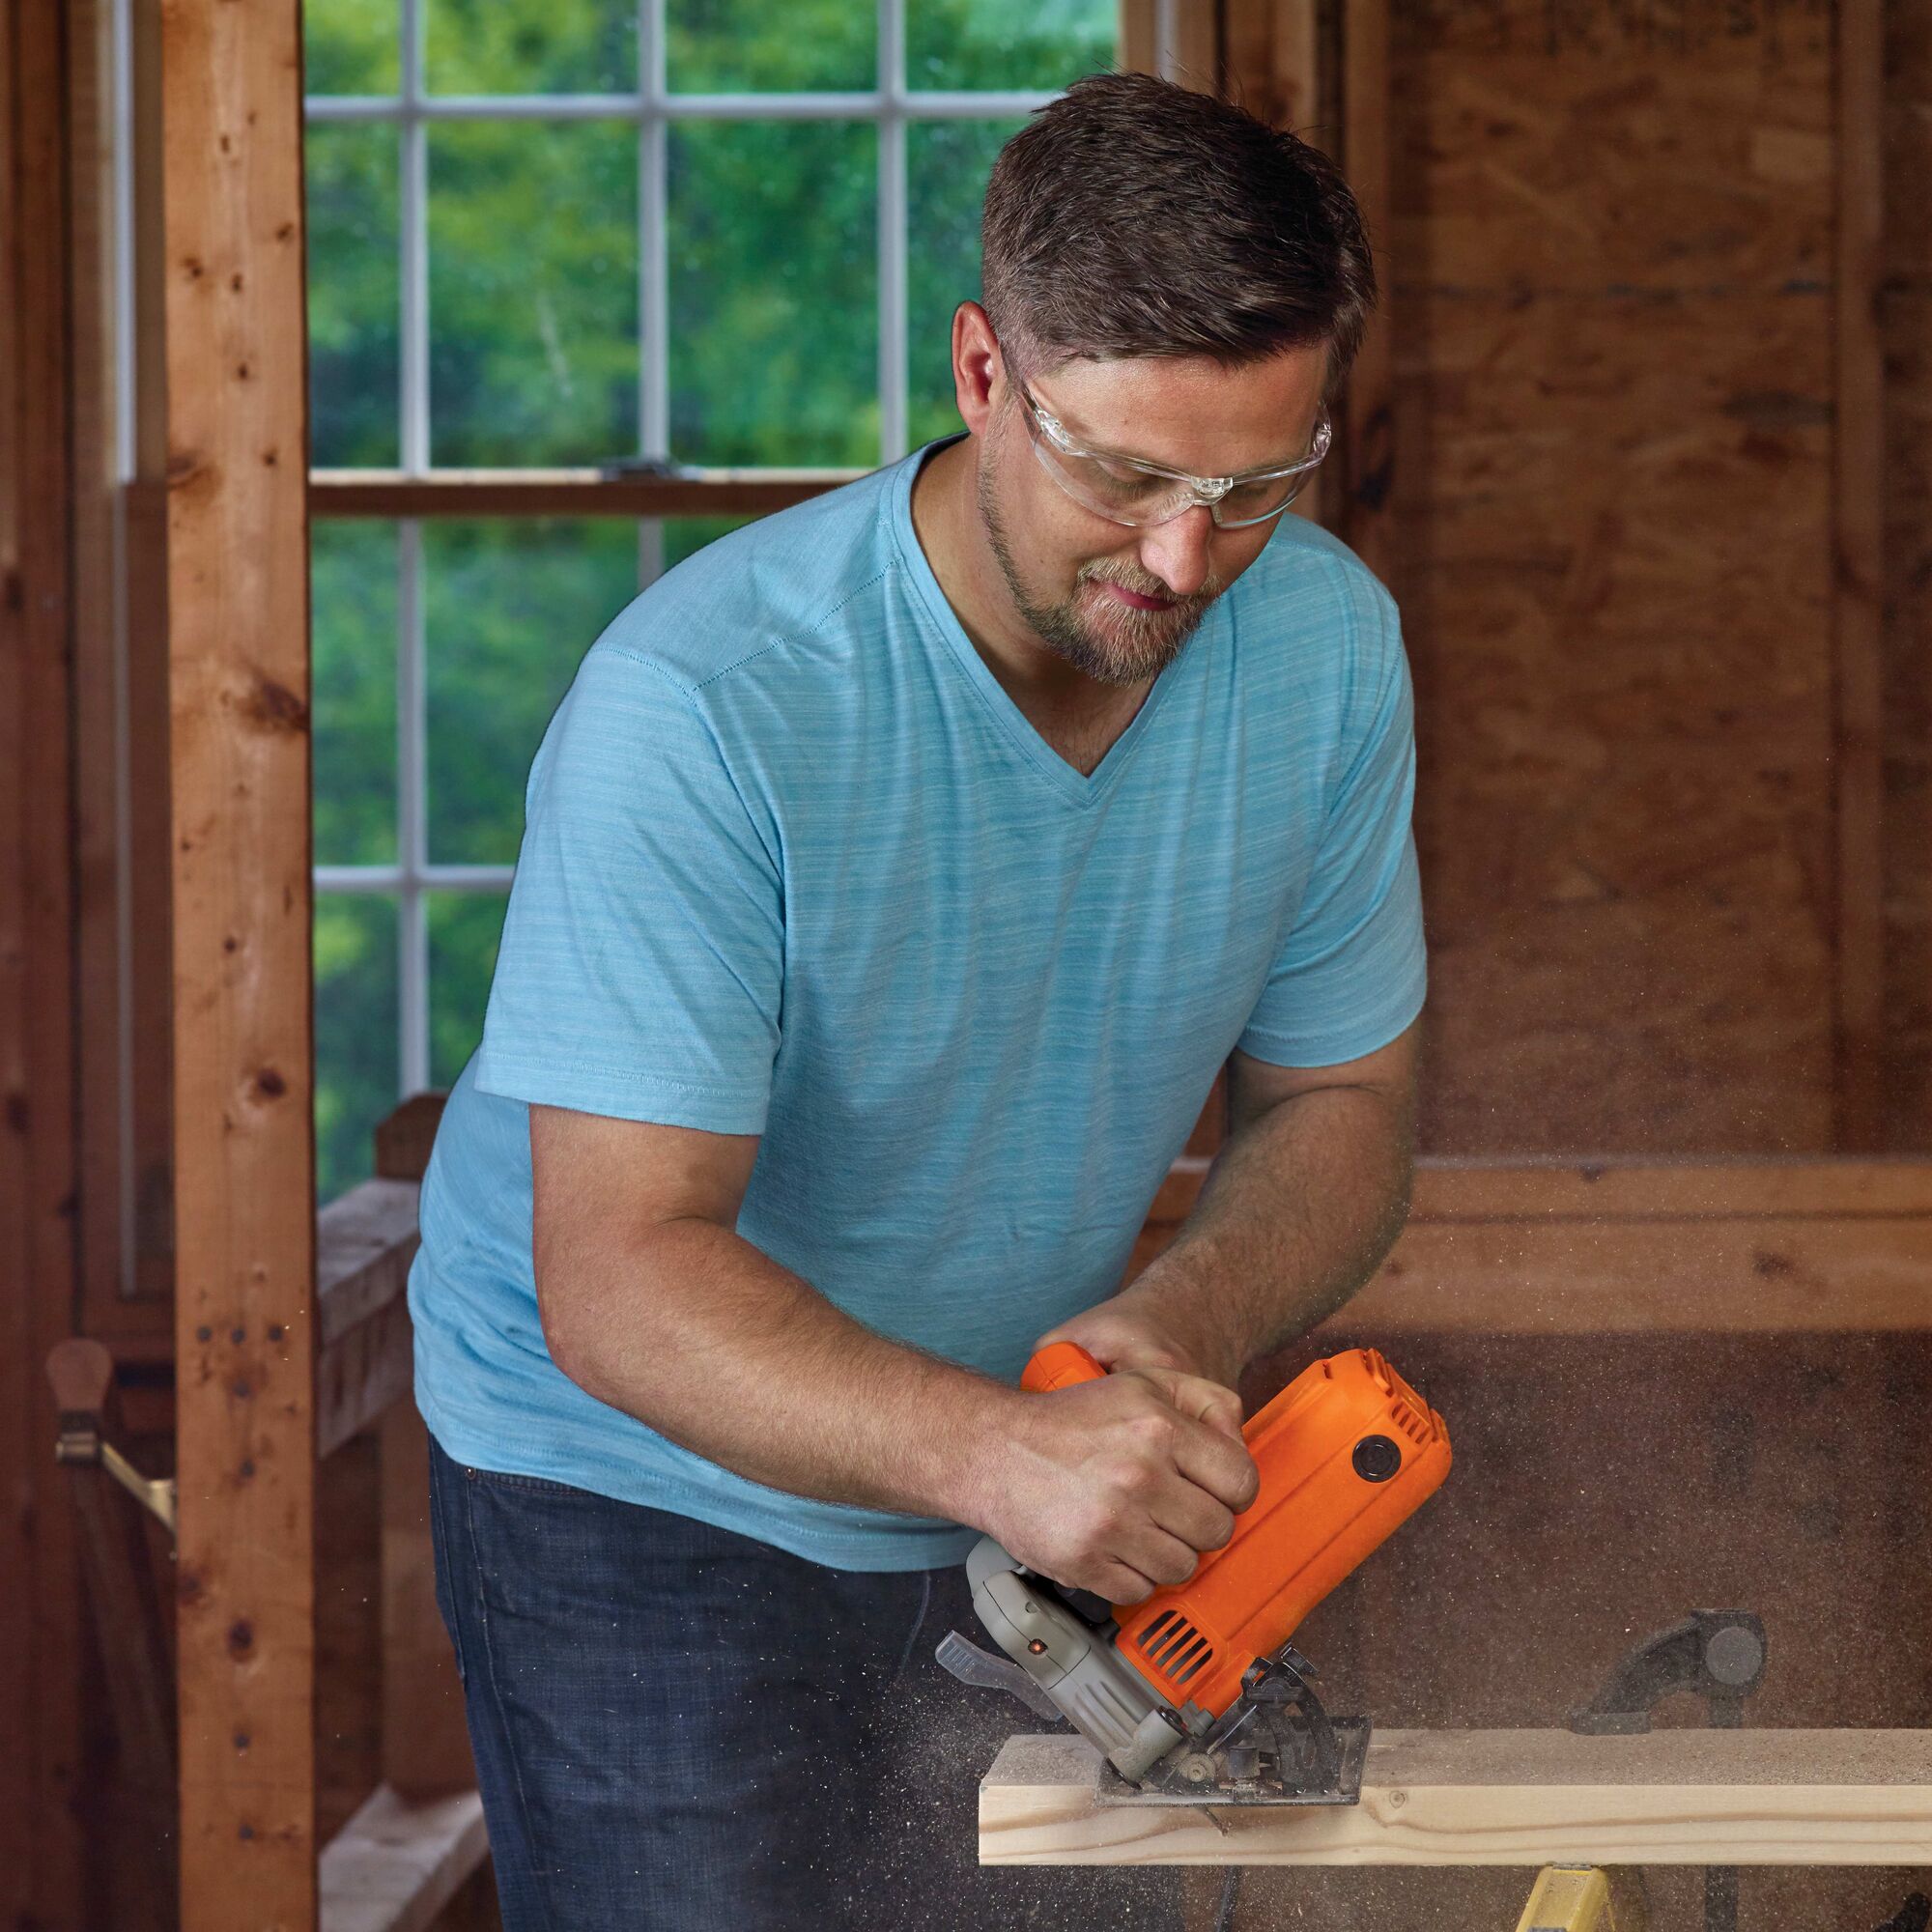 Man wearing safety goggles using the bevel feature of the circular saw